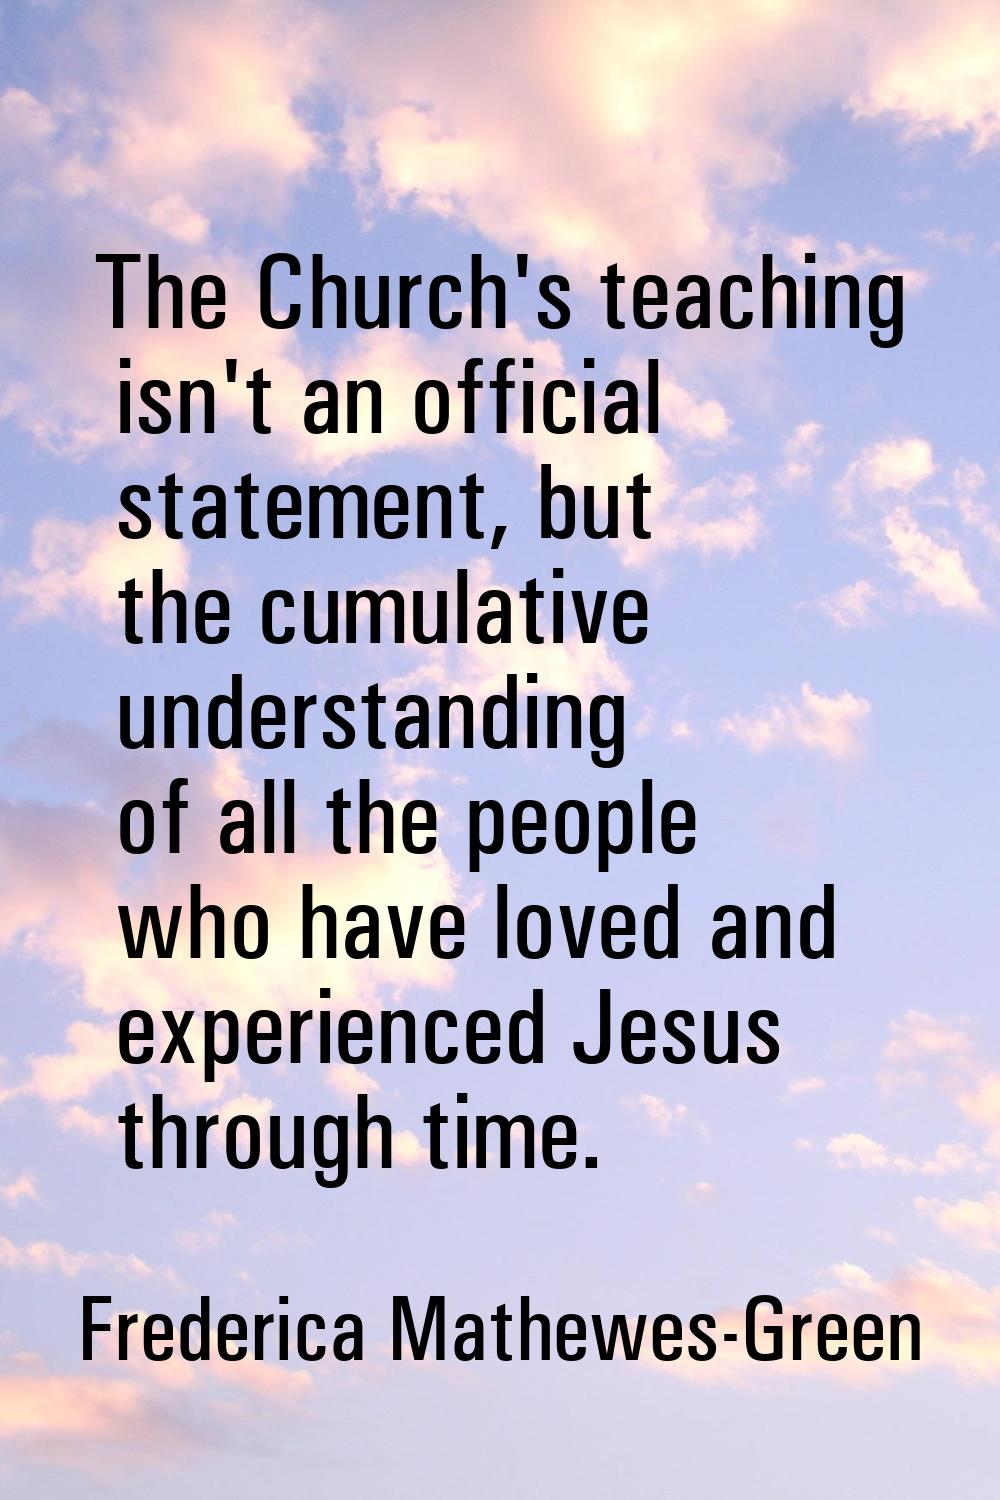 The Church's teaching isn't an official statement, but the cumulative understanding of all the peop